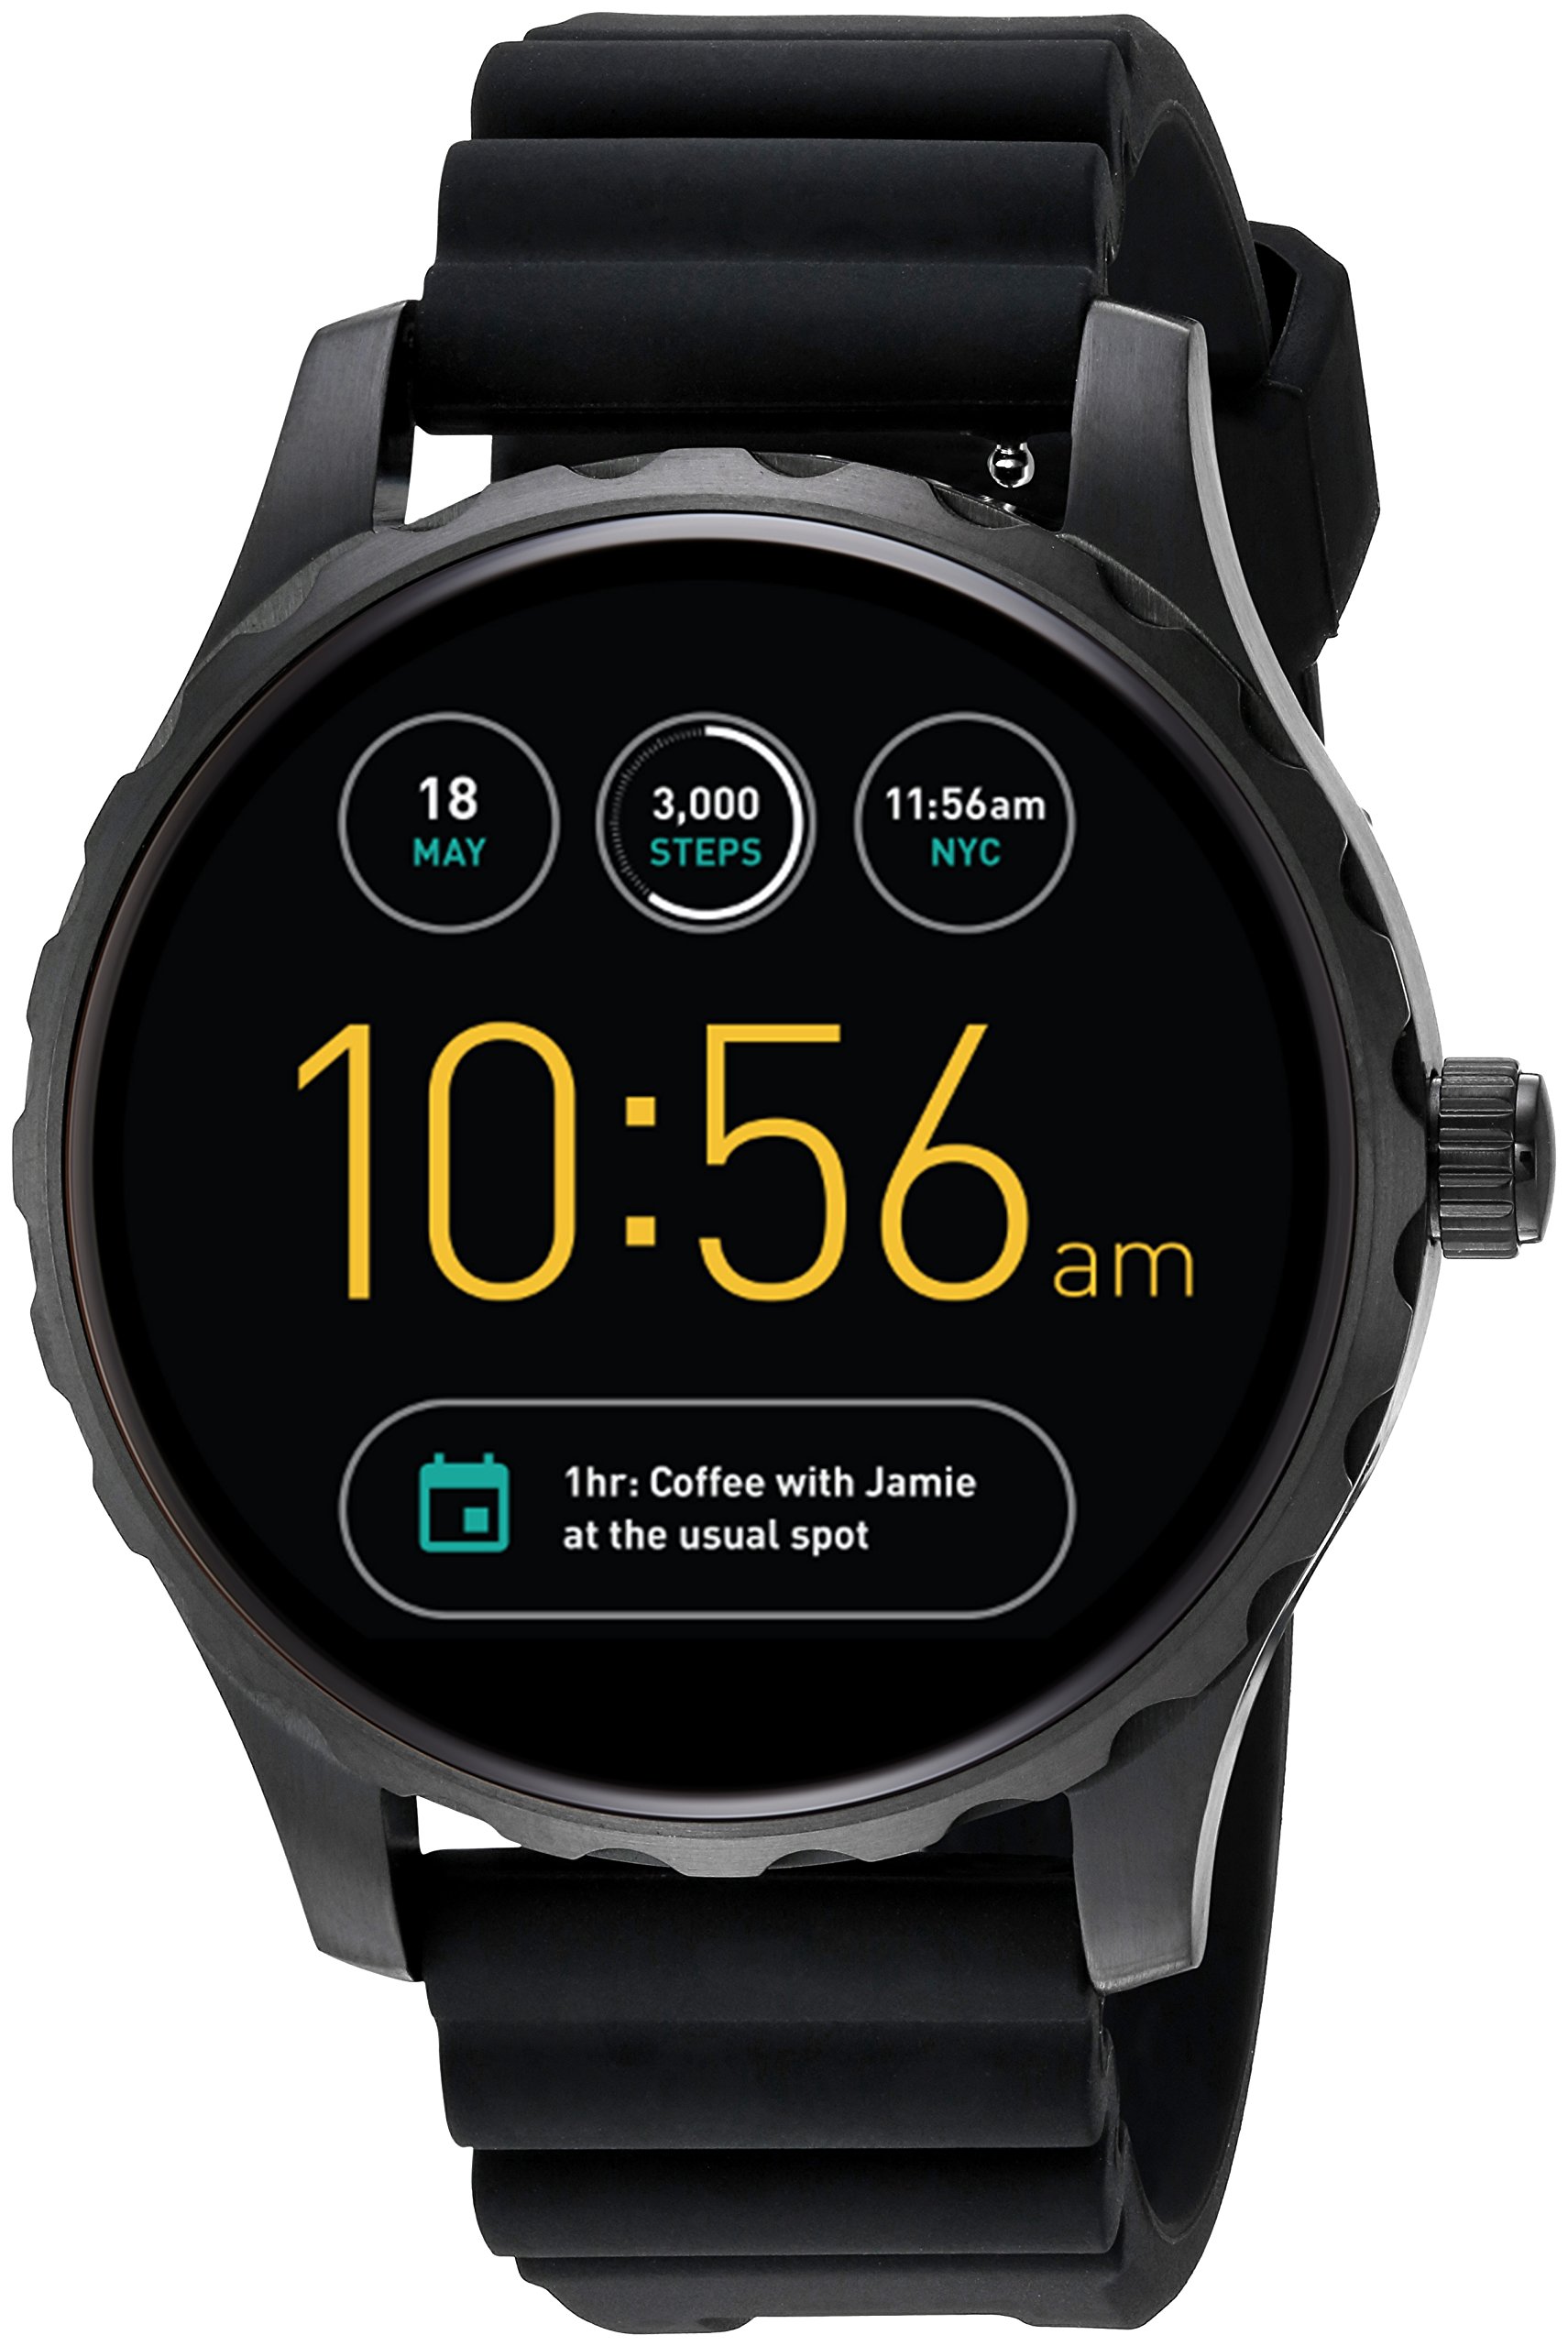 Đồng hồ Fossil Q Marshal Gen 2 Black Silicone Touchscreen Smartwatch FTW2107